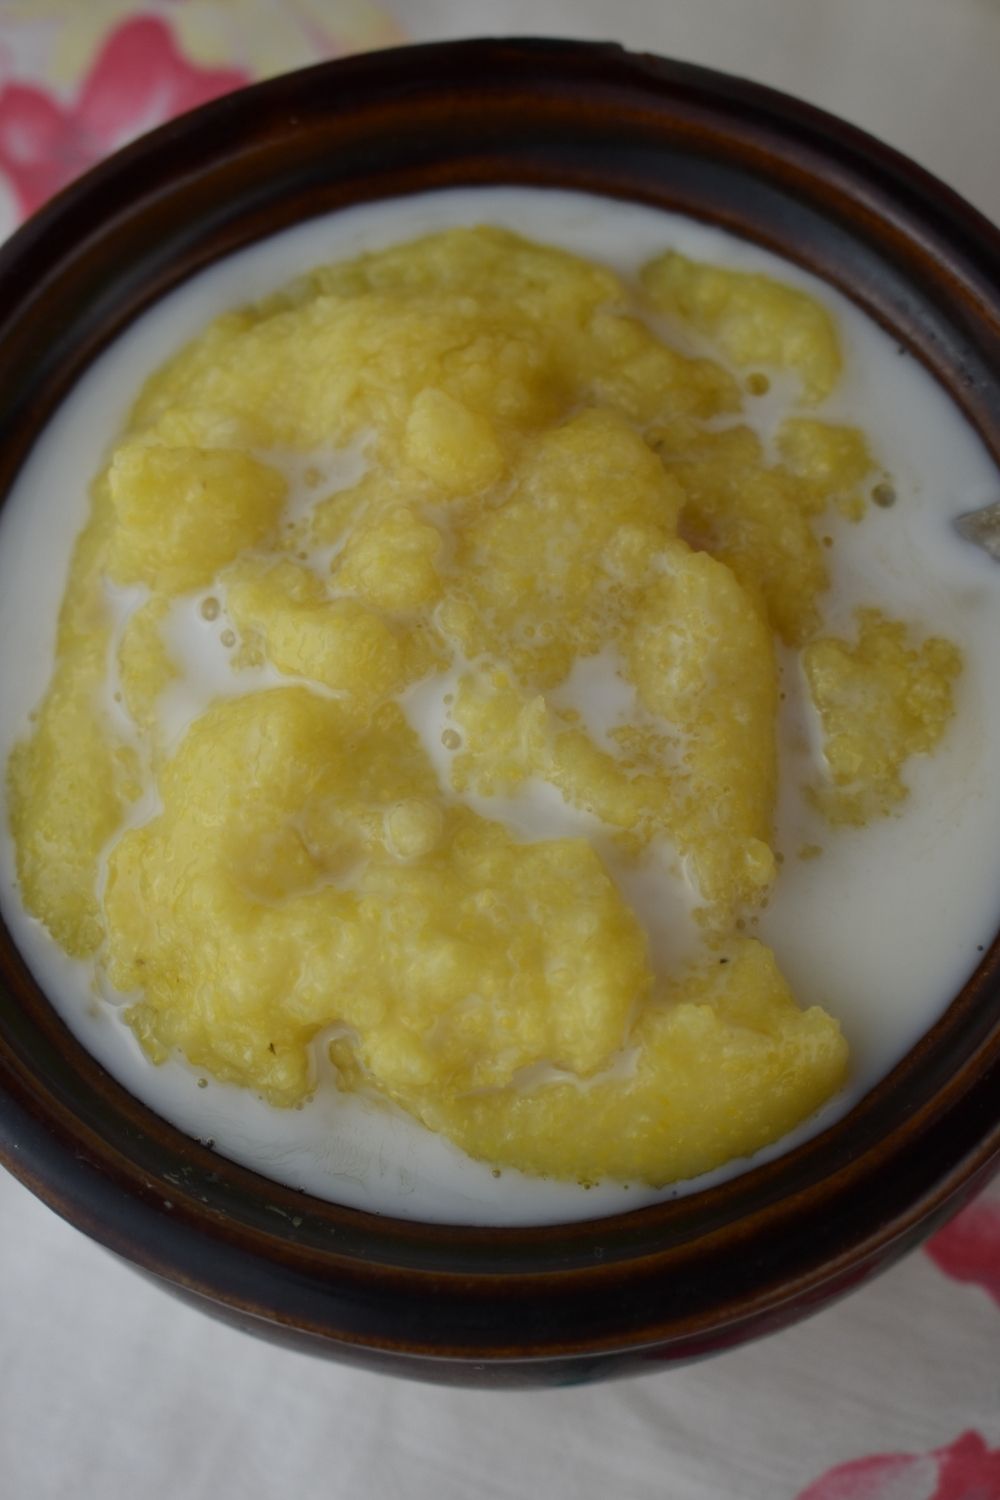 While many recipes call for fried cornmeal mush, this particular Cornmeal Mush Recipe is not fried.  Instead, this old fashioned mush recipe is topped with sugar and milk and eaten with a spoon. 